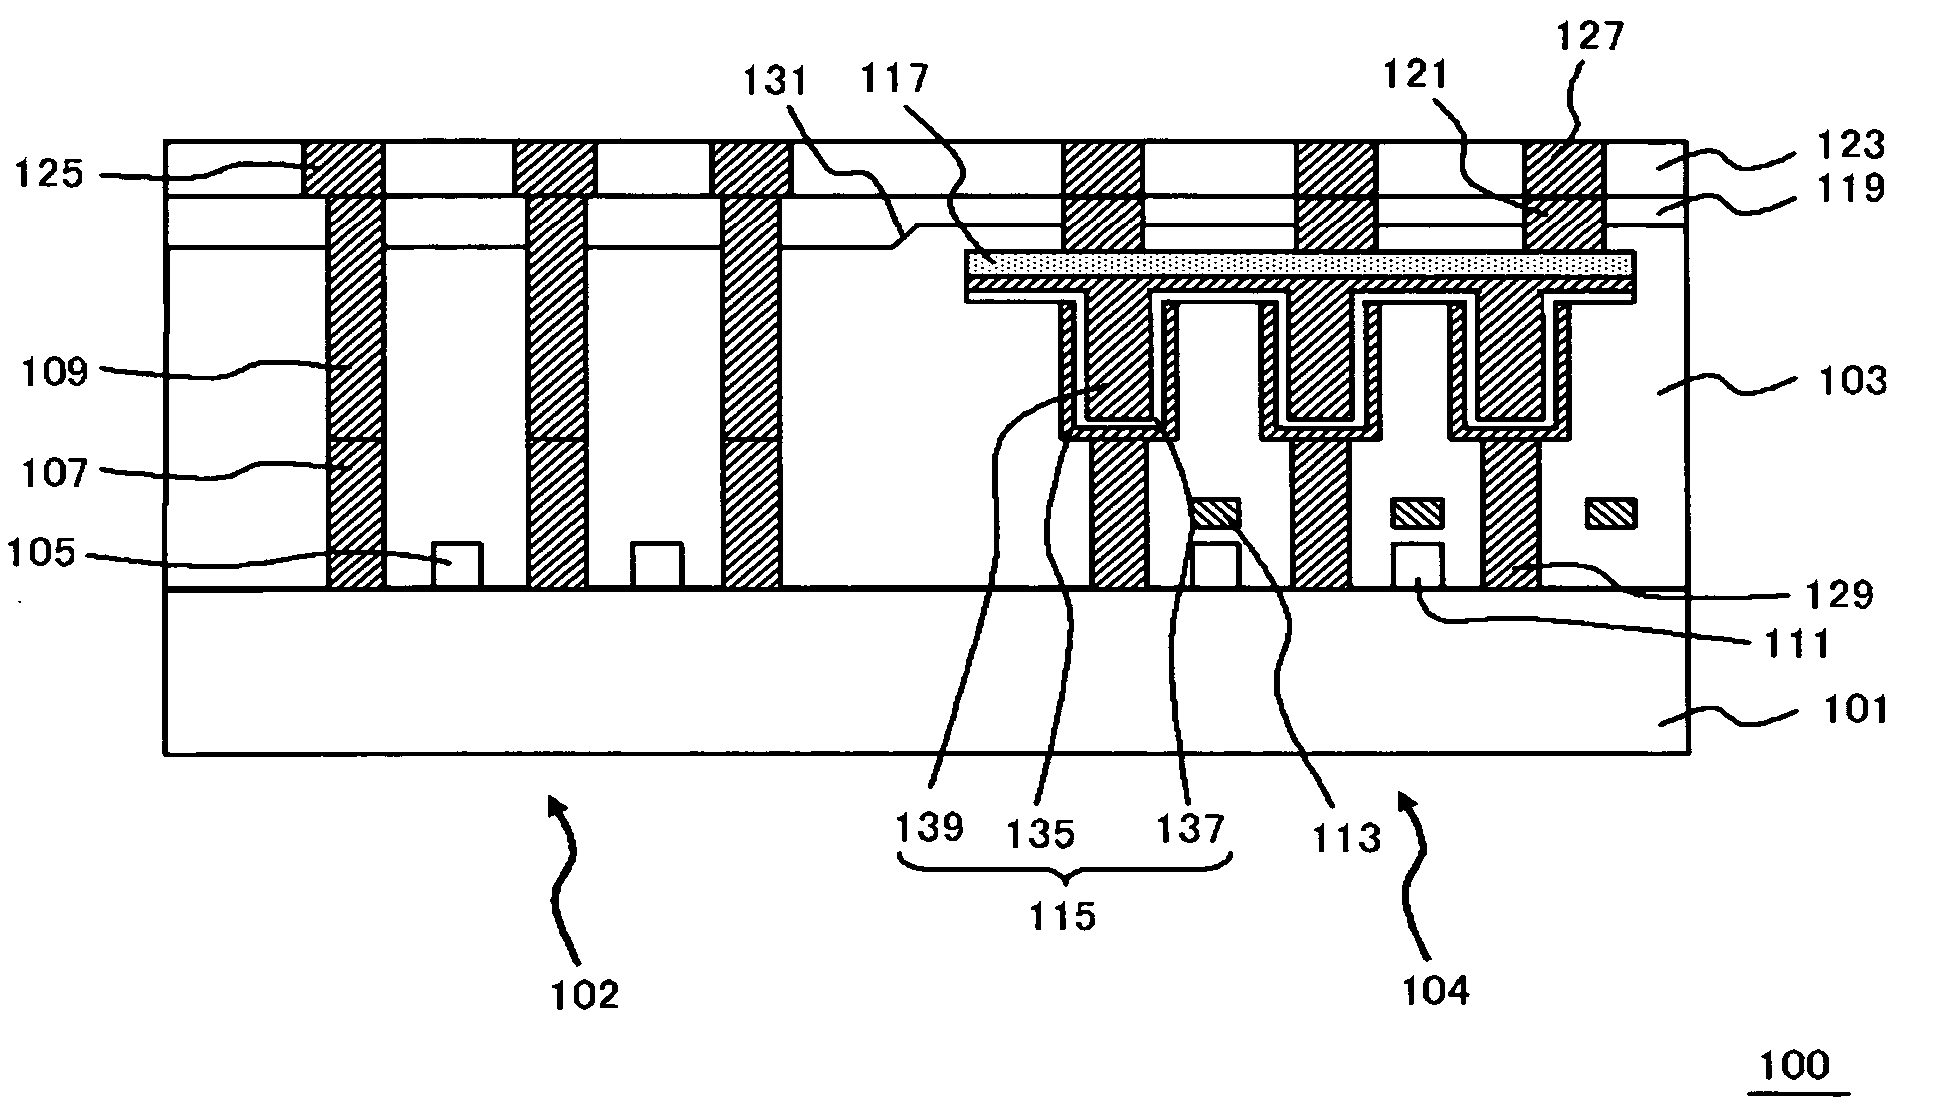 A semiconductor device including a memory unit and a logic unit